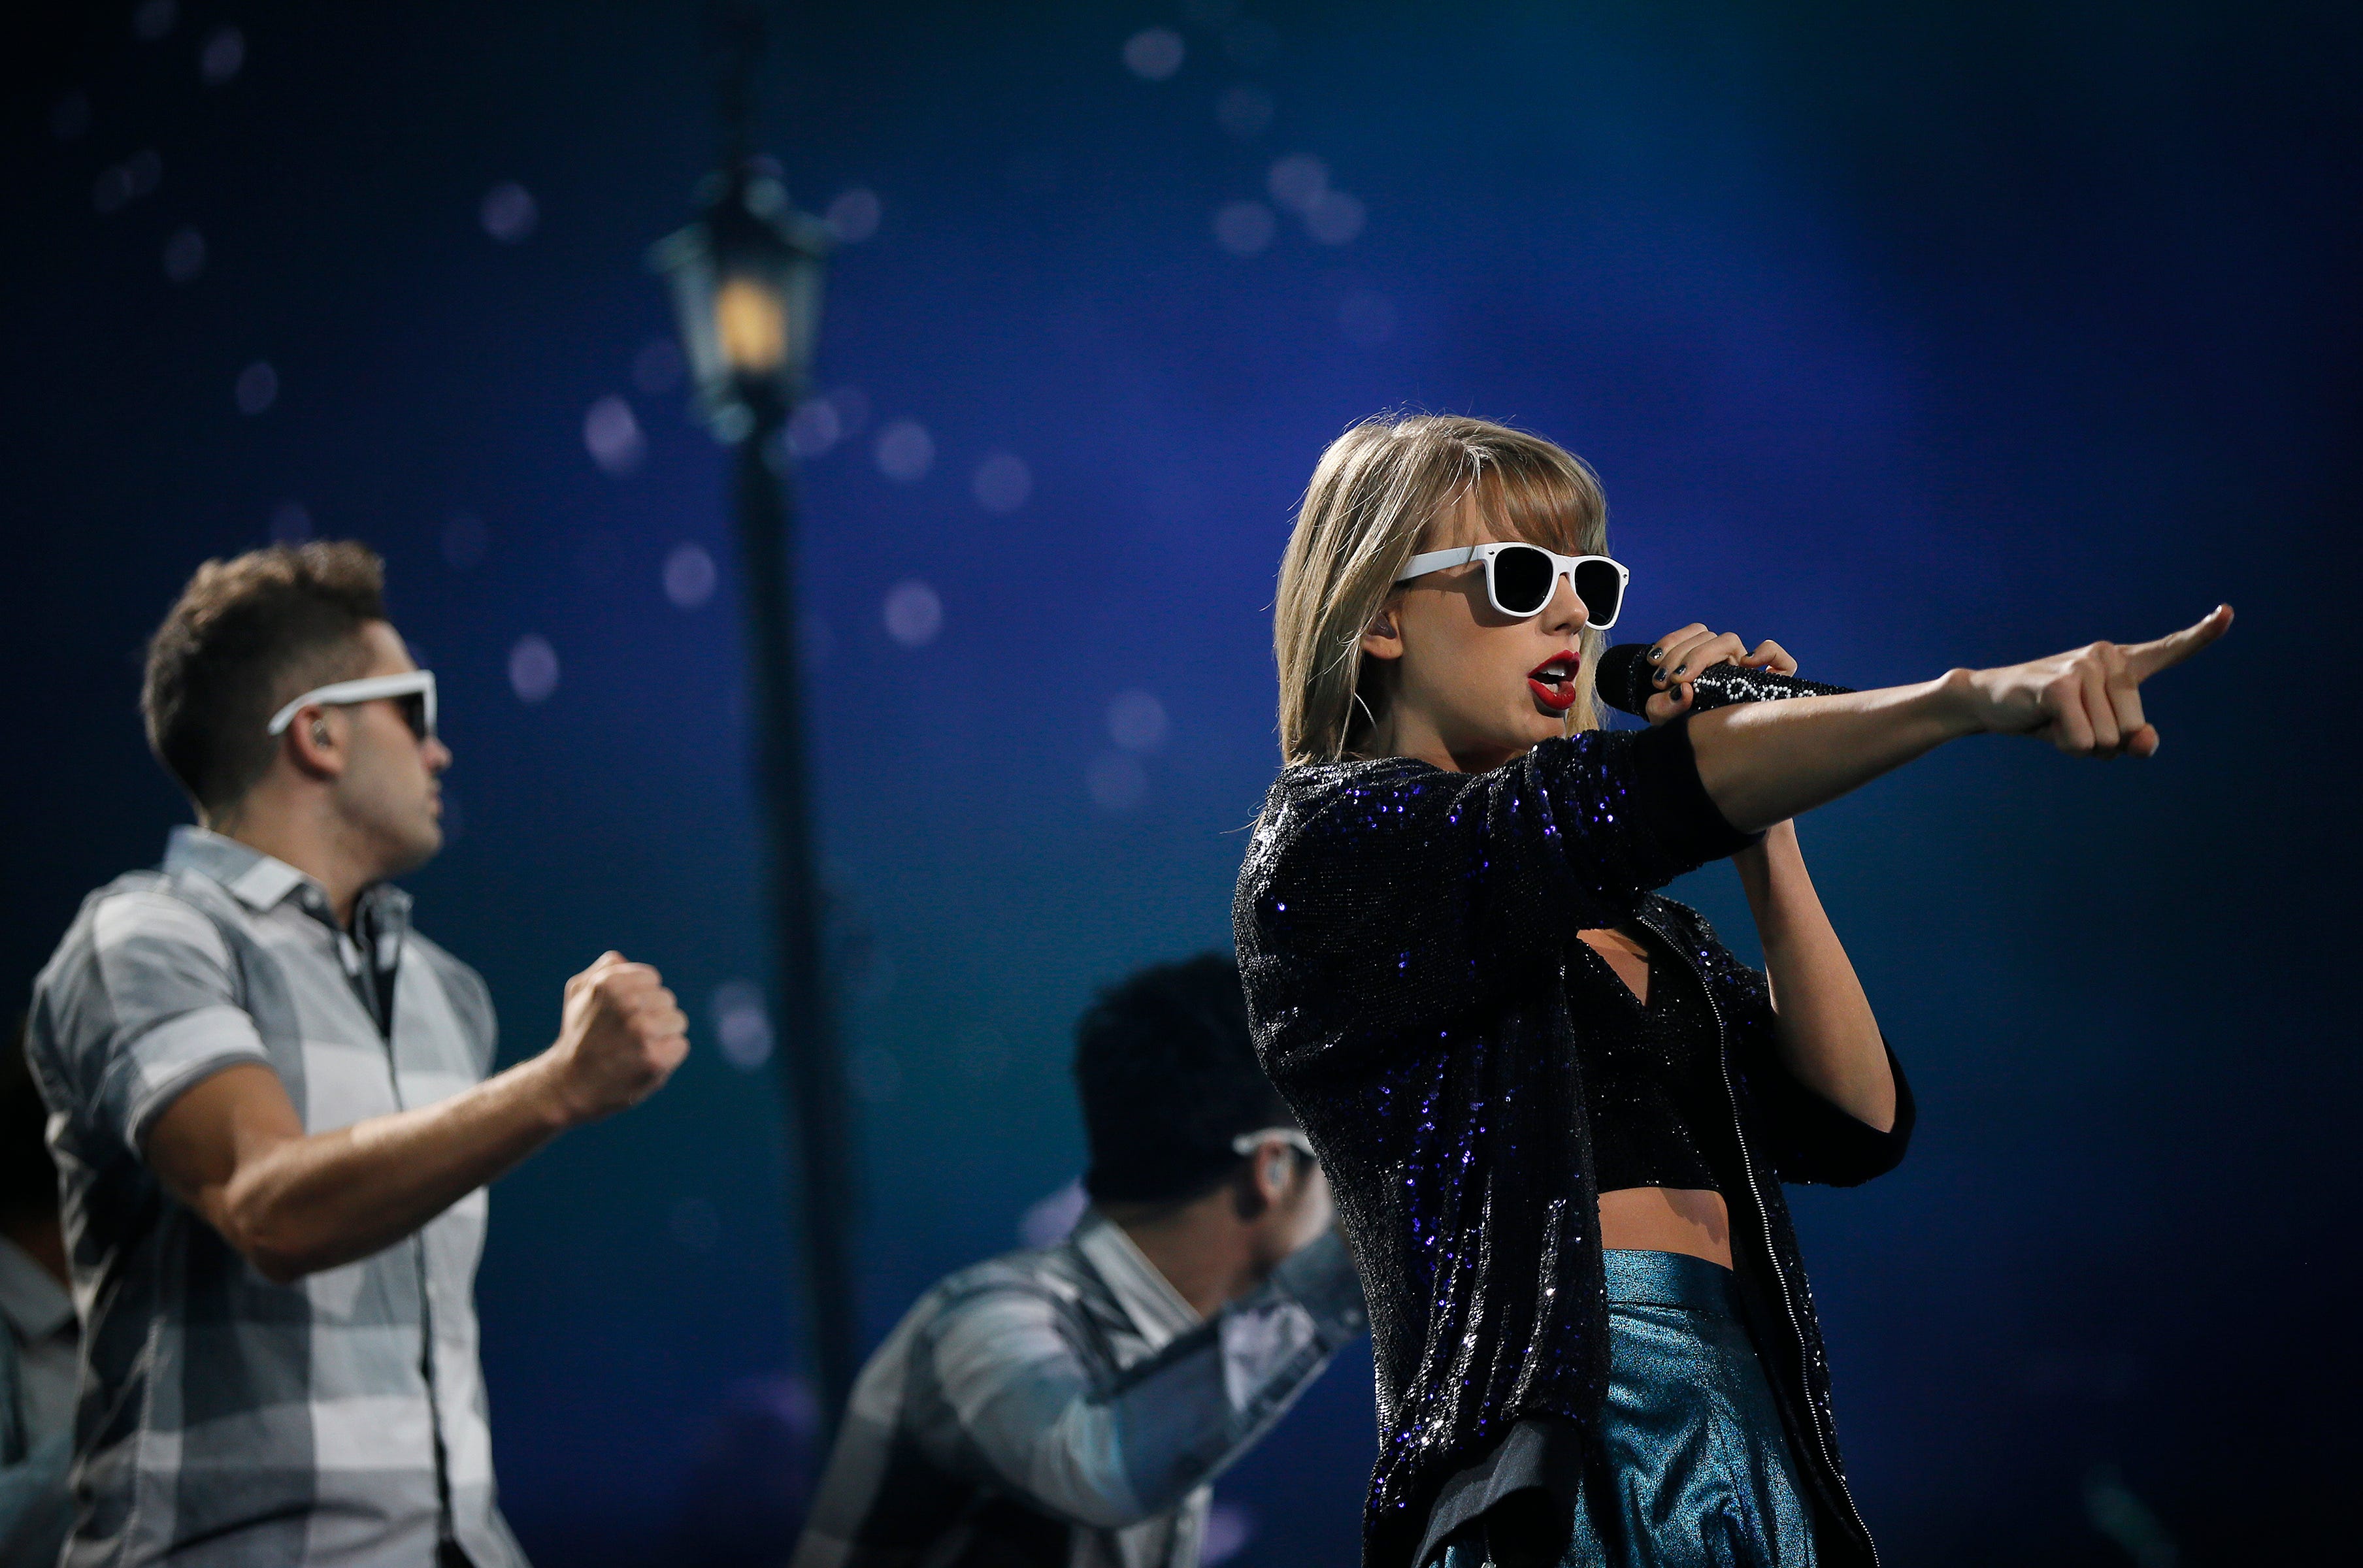 Taylor Swift performs the first of two shows on her 1989 World Tour at Nationwide Arena in Columbus on Sept. 17, 2015. (Adam Cairns / The Columbus Dispatch)